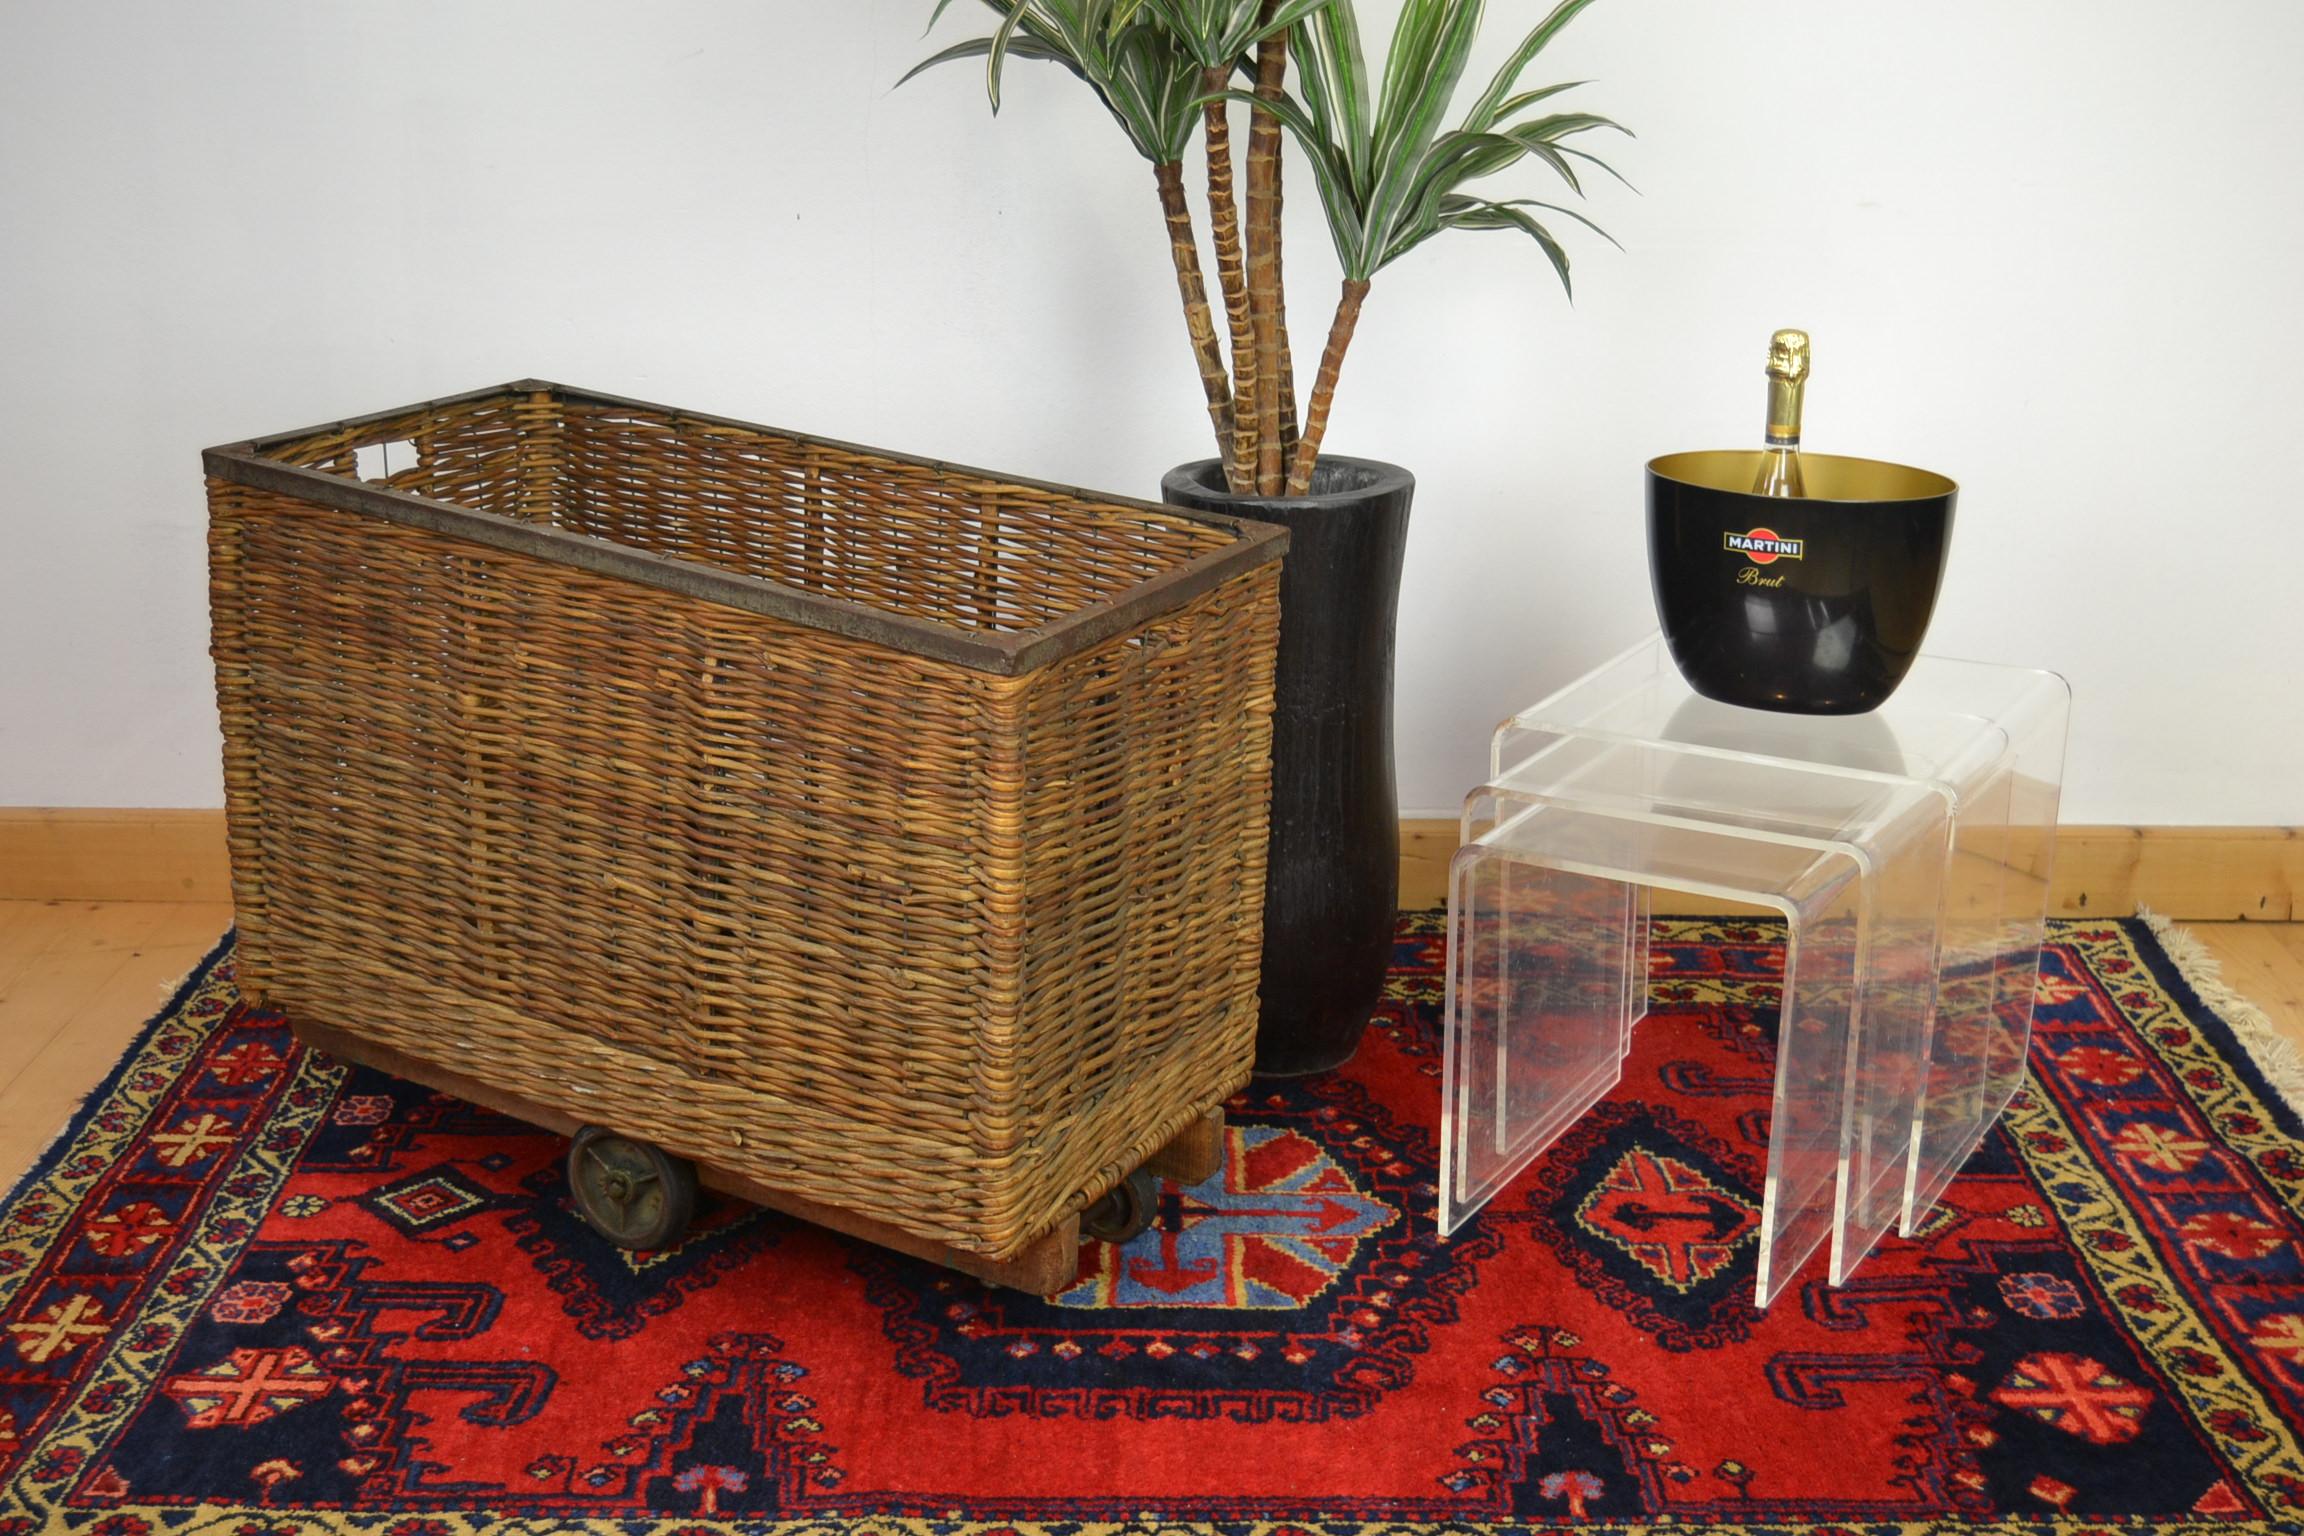 Antique wicker factory basket on wheels - basket trolley - laundry trolley.
This old wicker trolley cart on wheels is a great decorative object as well a useful object:
for the laundry, storage basket for toys, fireplace wood, newspapers and